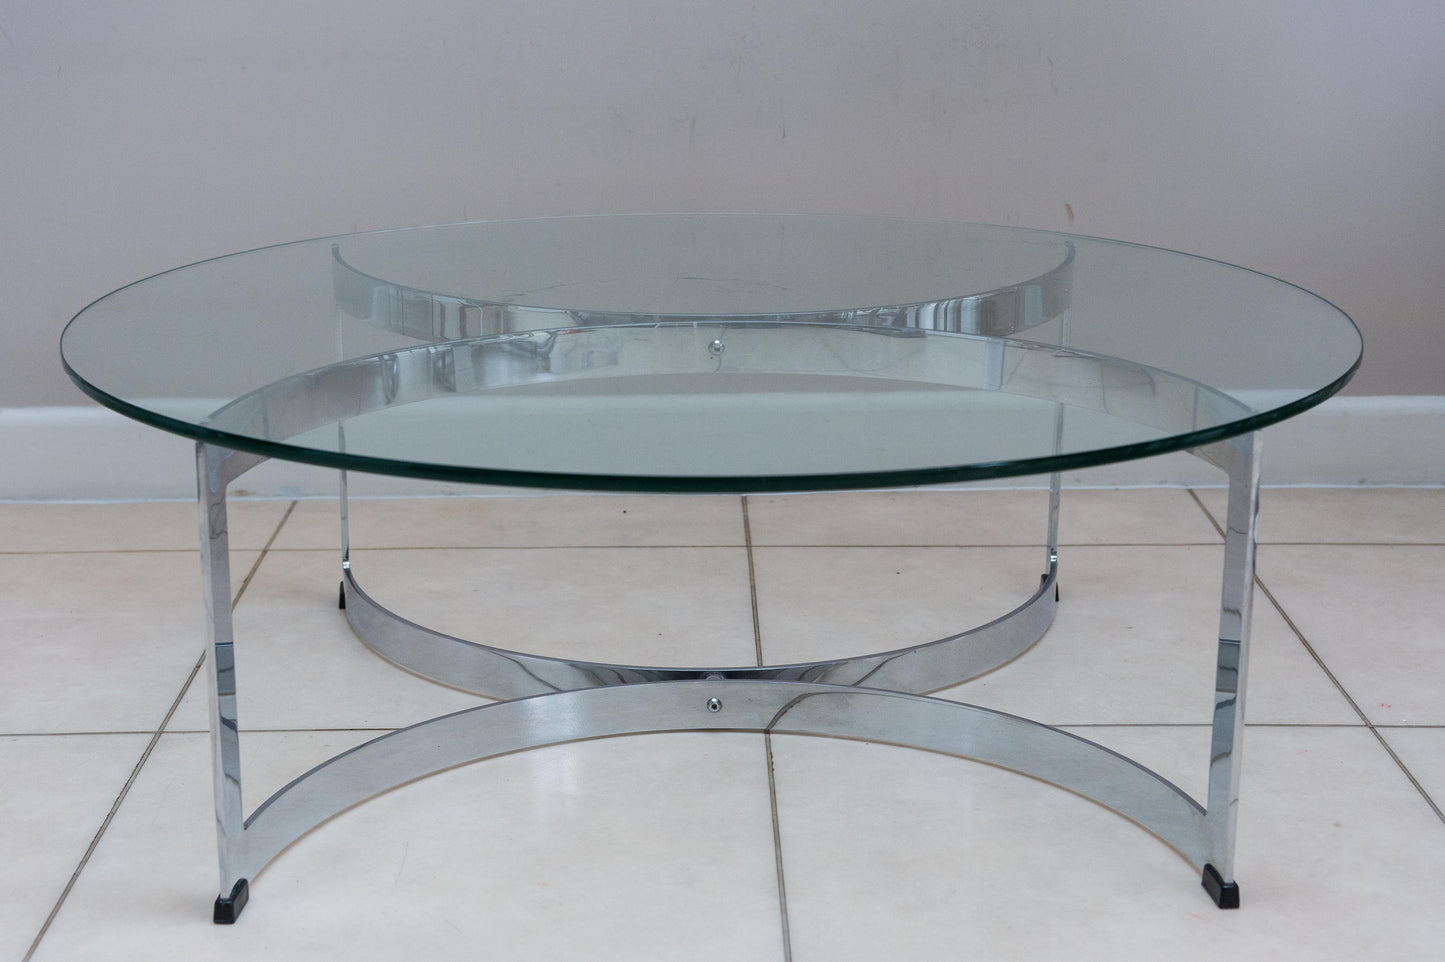 Merrow Associates 'Model 341 C' Coffee Table By Richard Young